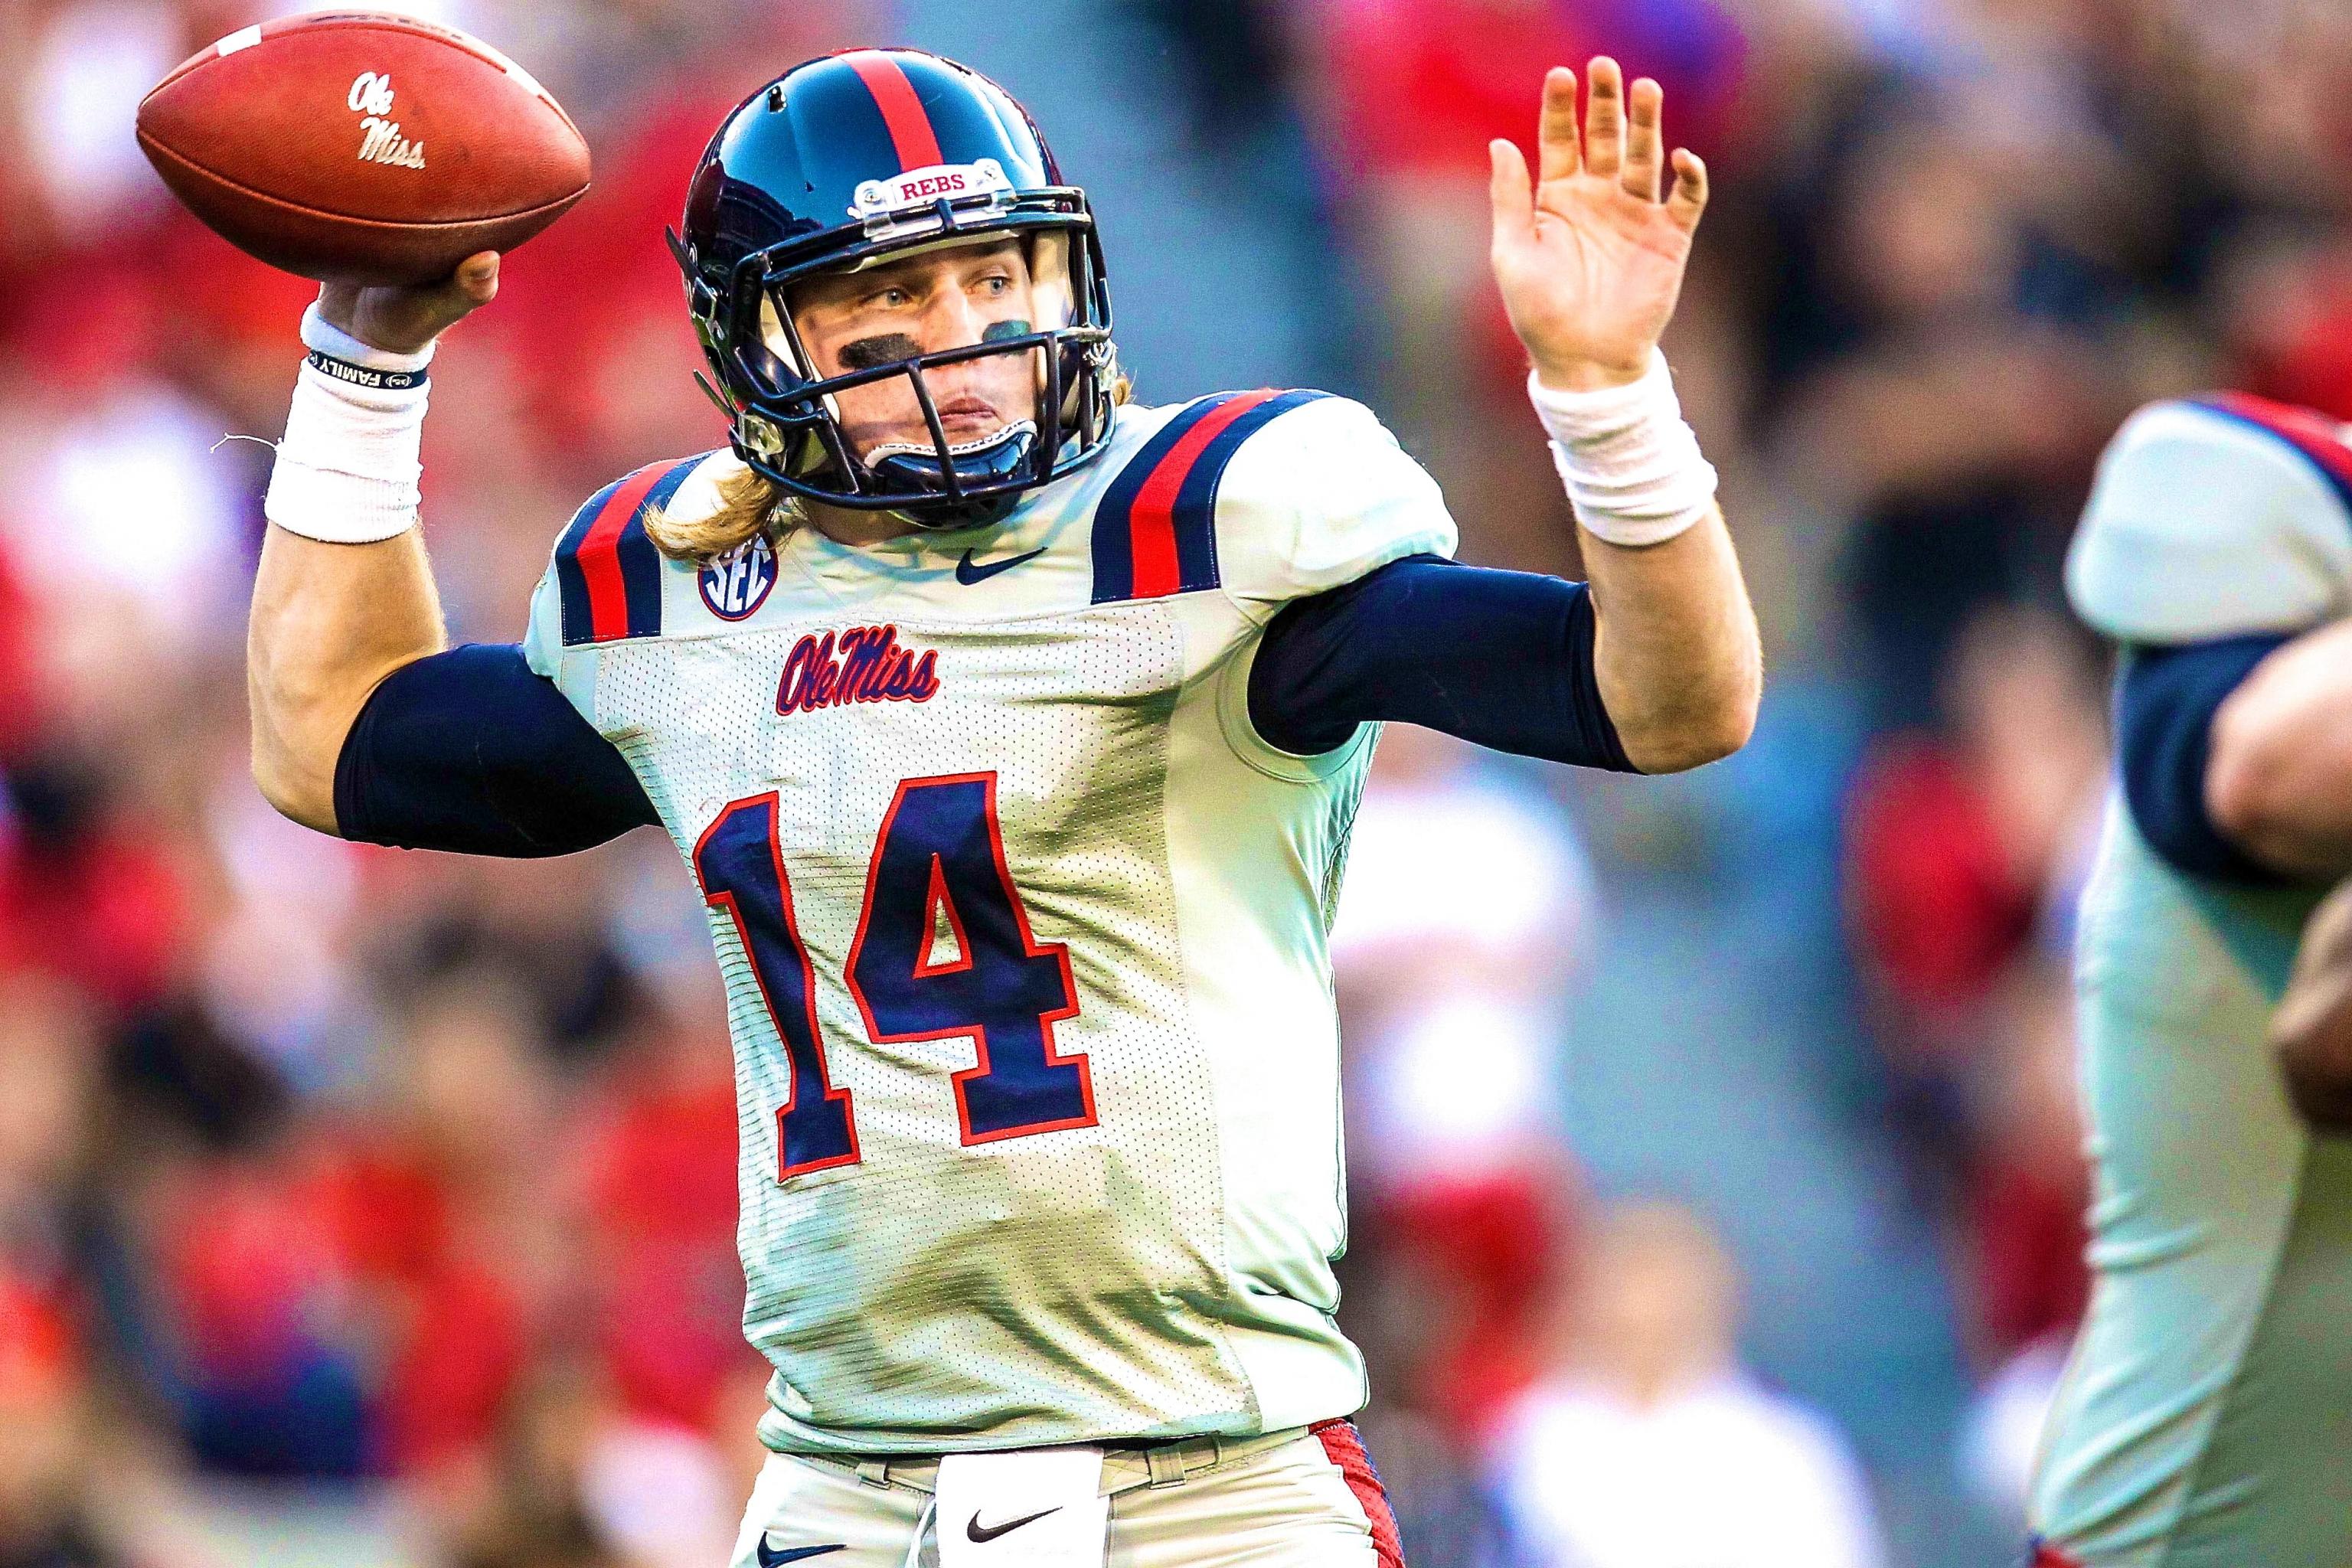 Quarterback Bo Wallace is not impressed with Ole Miss' new uniforms